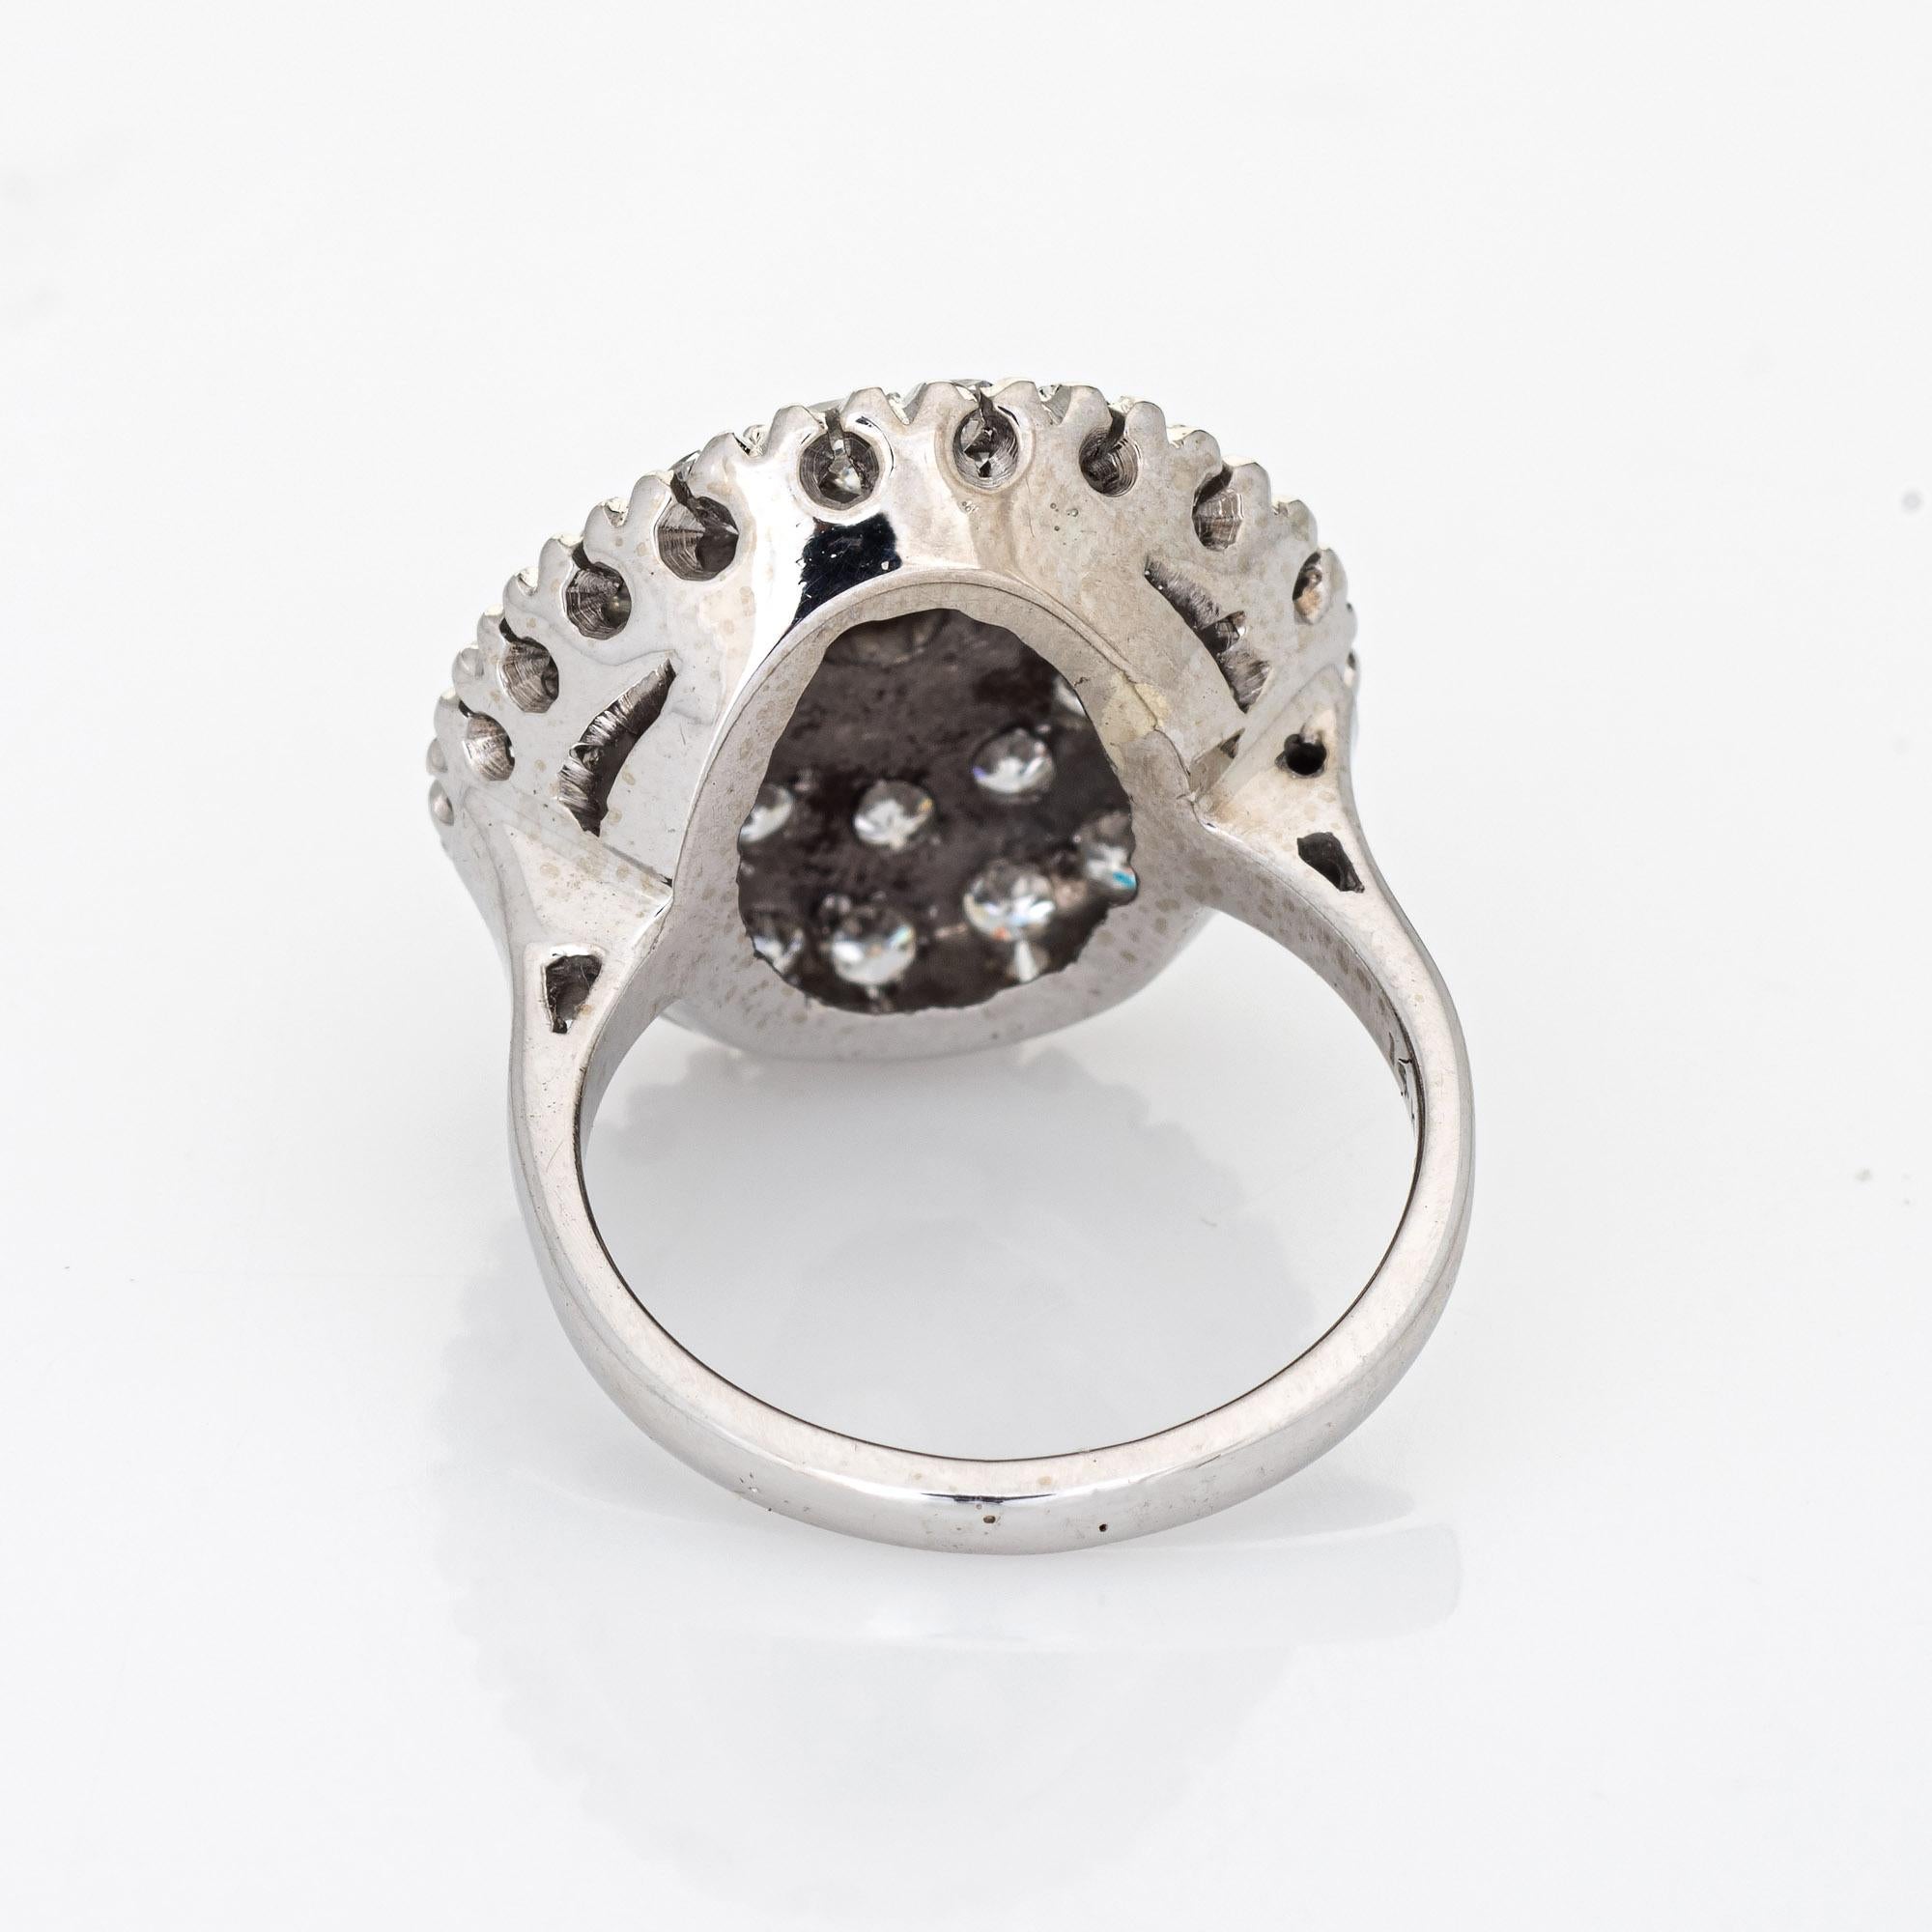 Vintage Diamond Cluster Ring 14k White Gold Round Cocktail Fine Jewelry In Good Condition For Sale In Torrance, CA